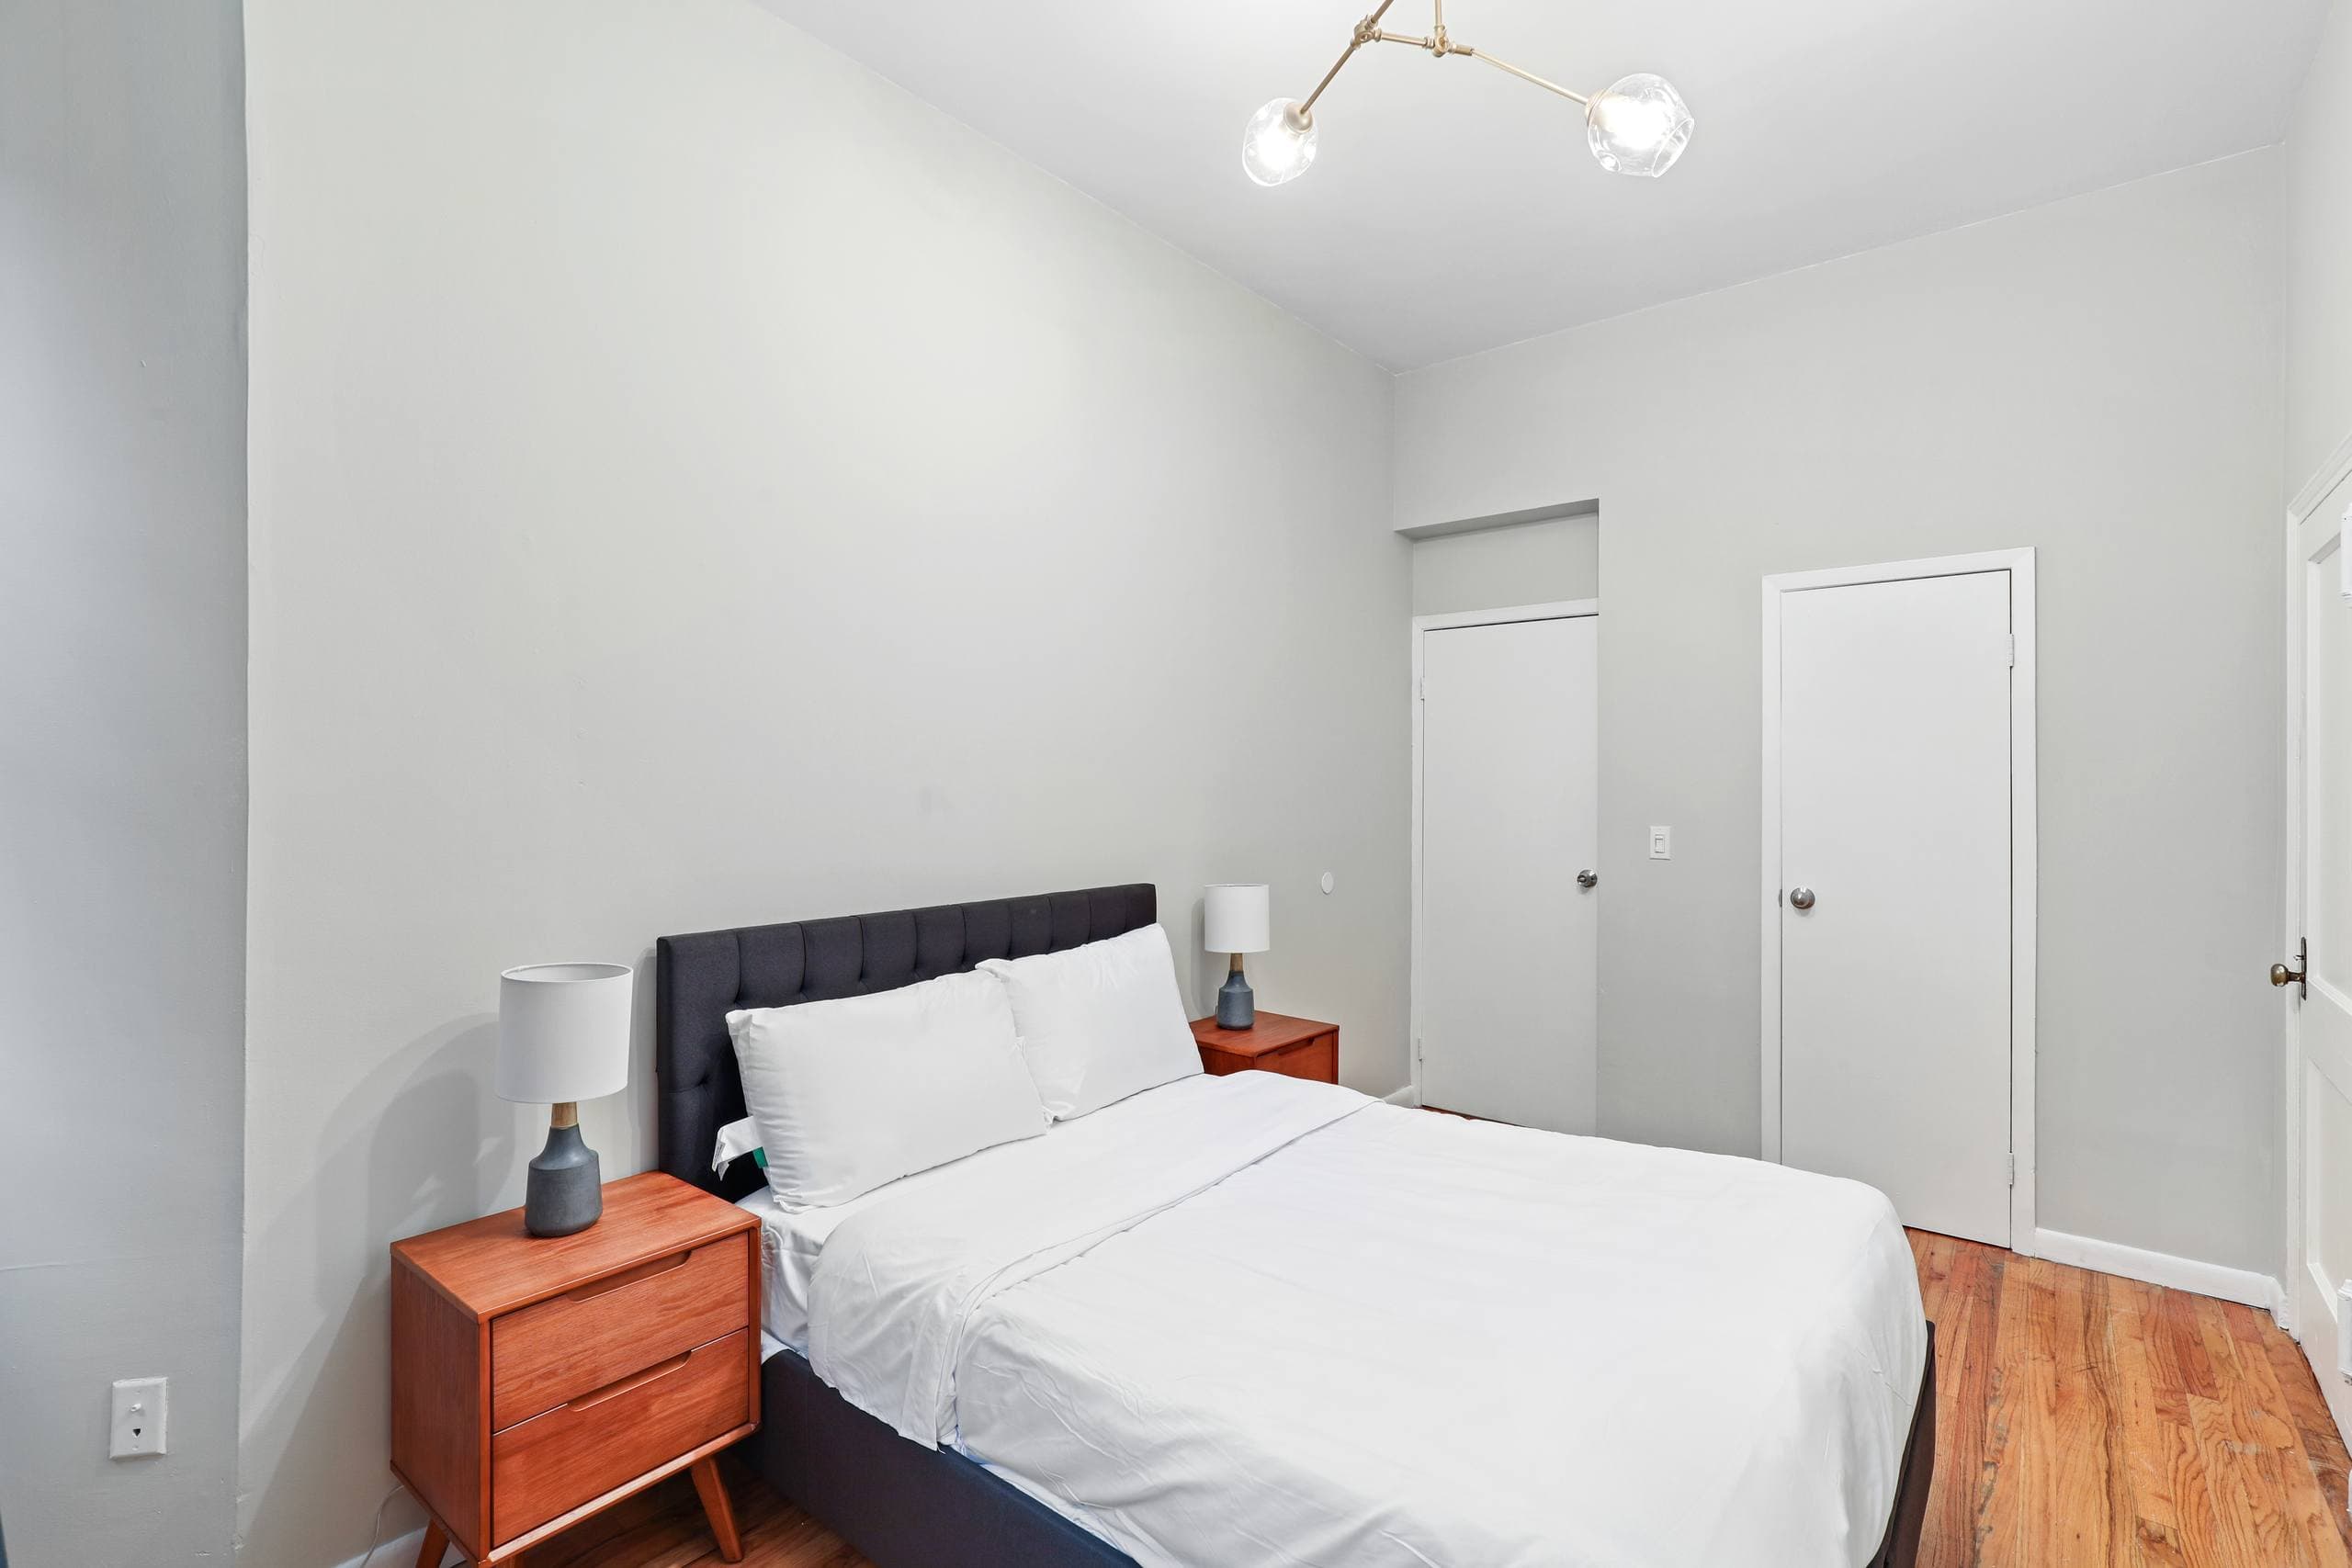 Photo 19 of #1901: Full Bedroom D at June Homes